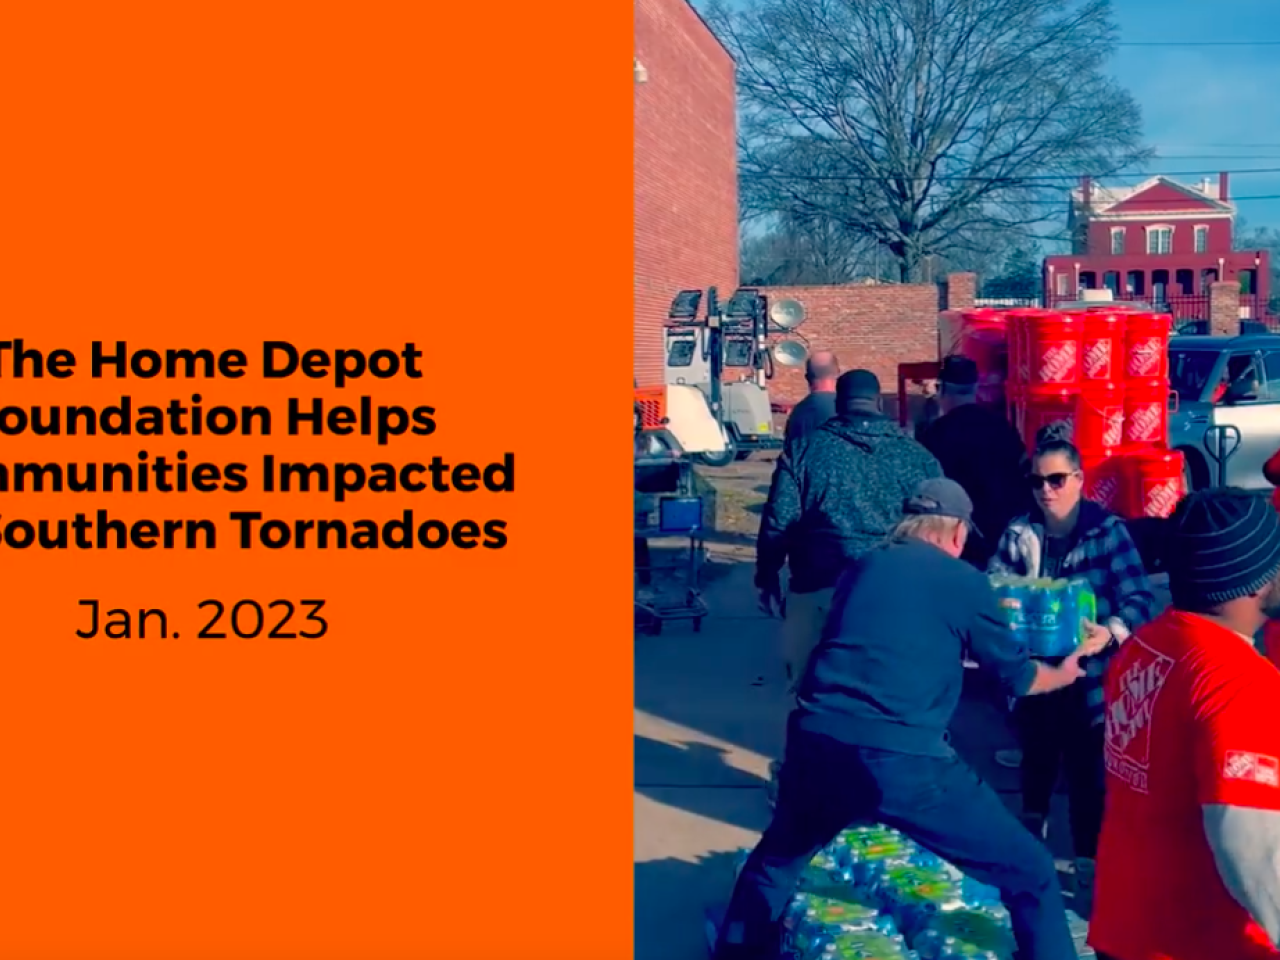 The Home Depot Foundation Helps Communities Impacted by Southern Tornadoes